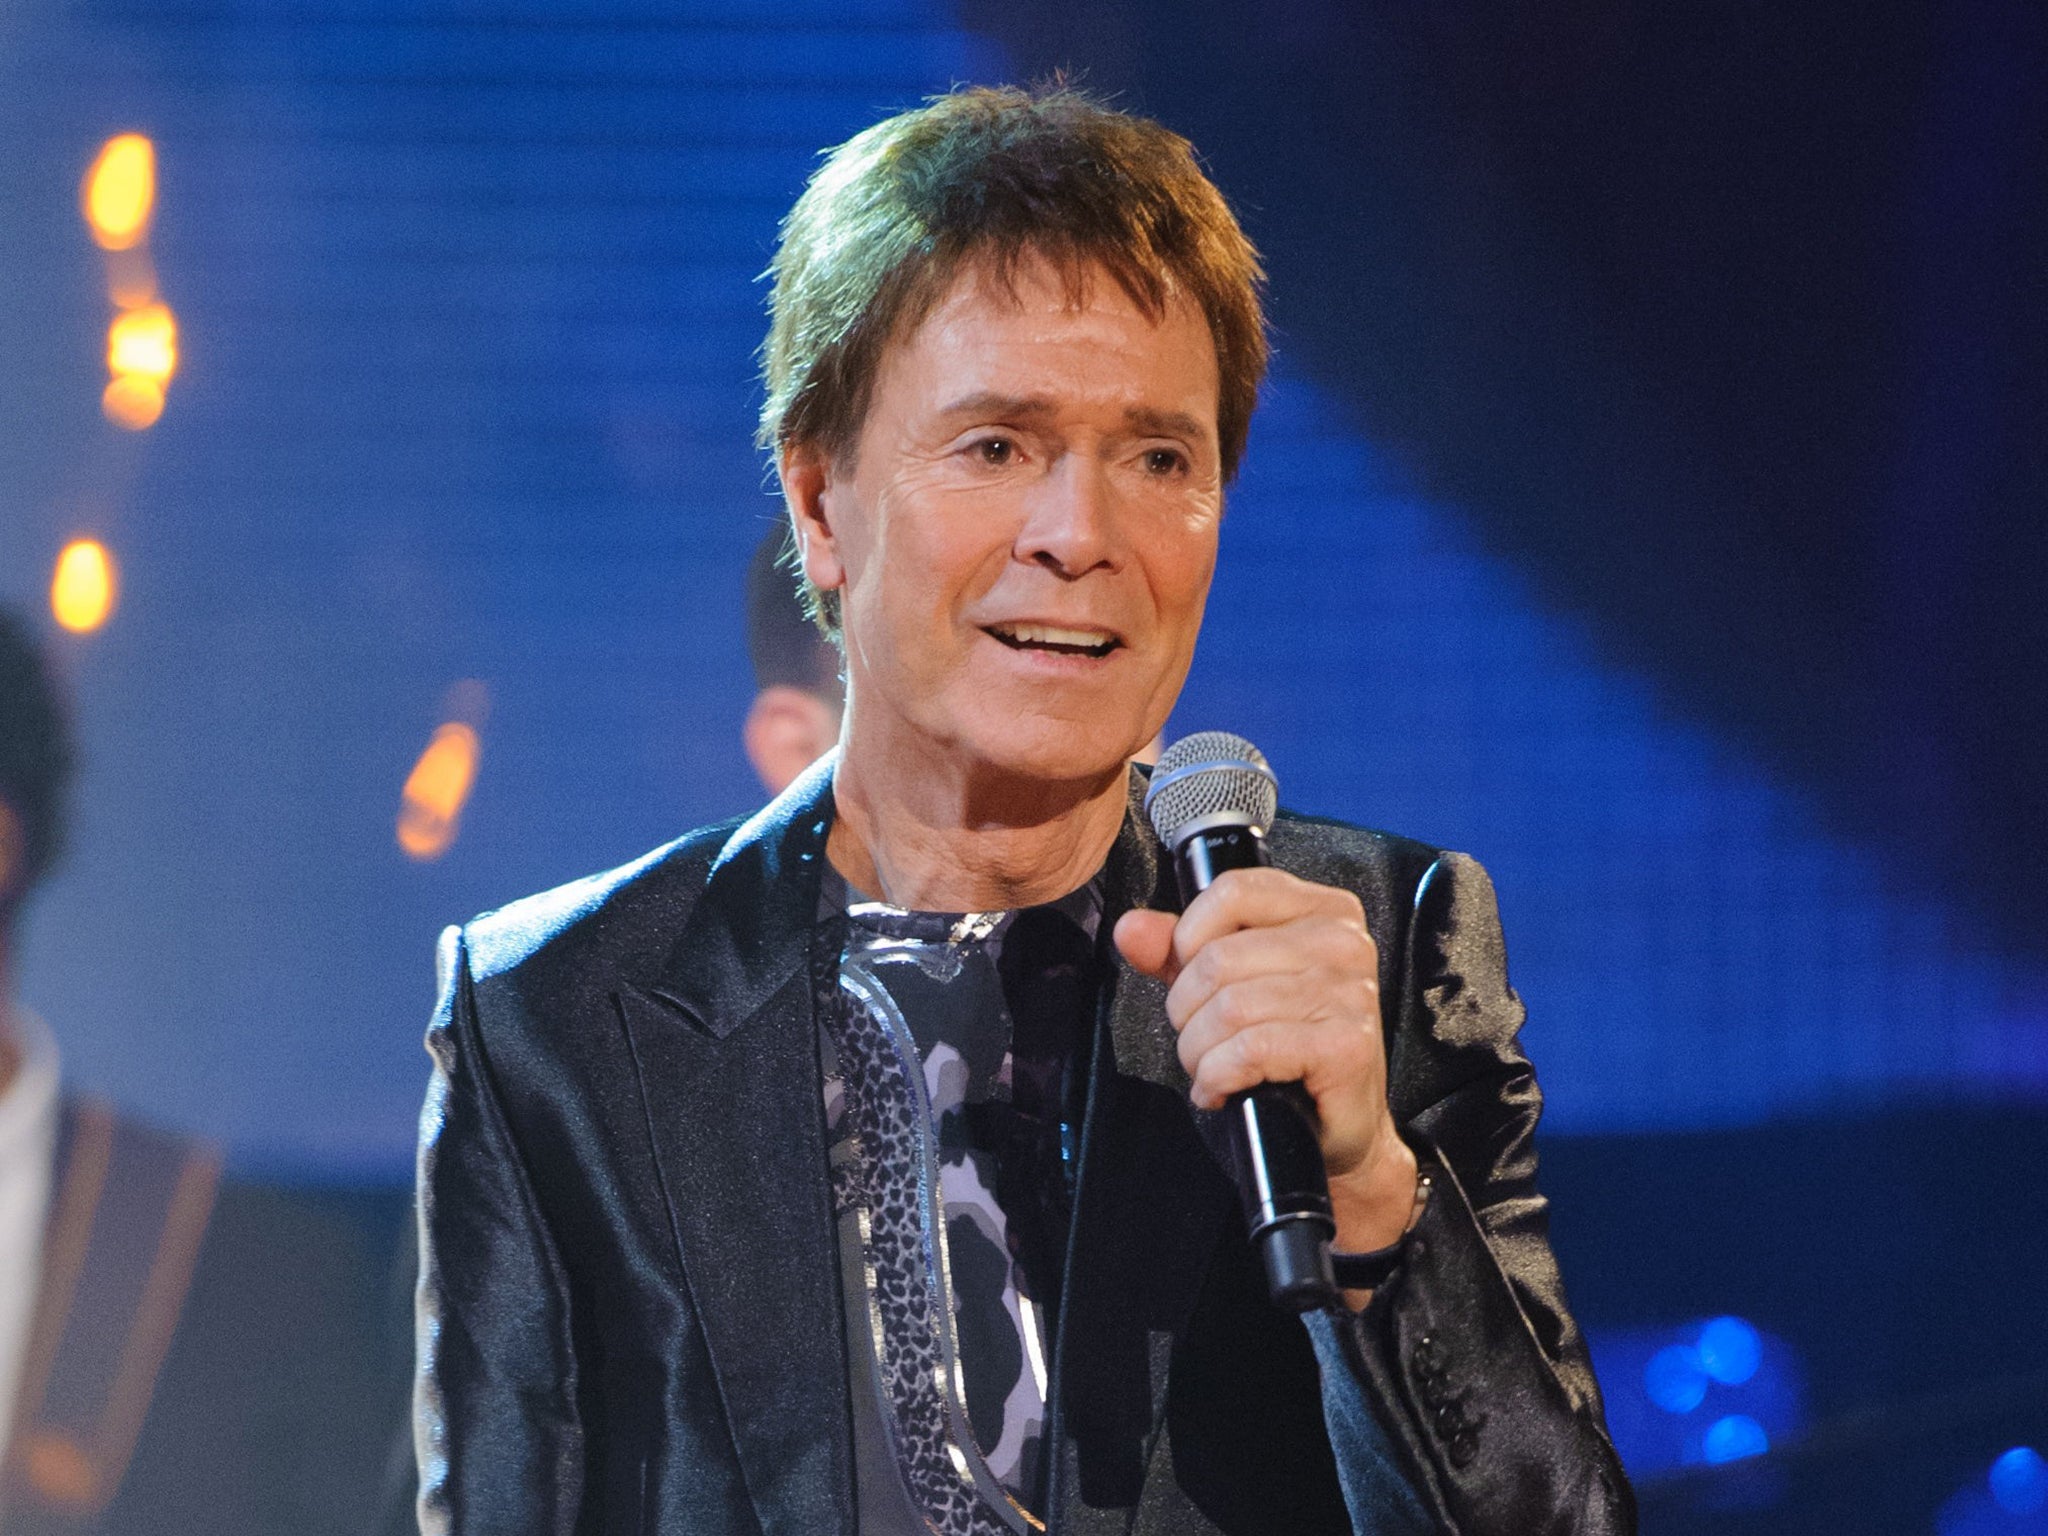 Sir Cliff Richard said the ‘gross intrusion’ into his privacy was the result of ‘illegal collusion’